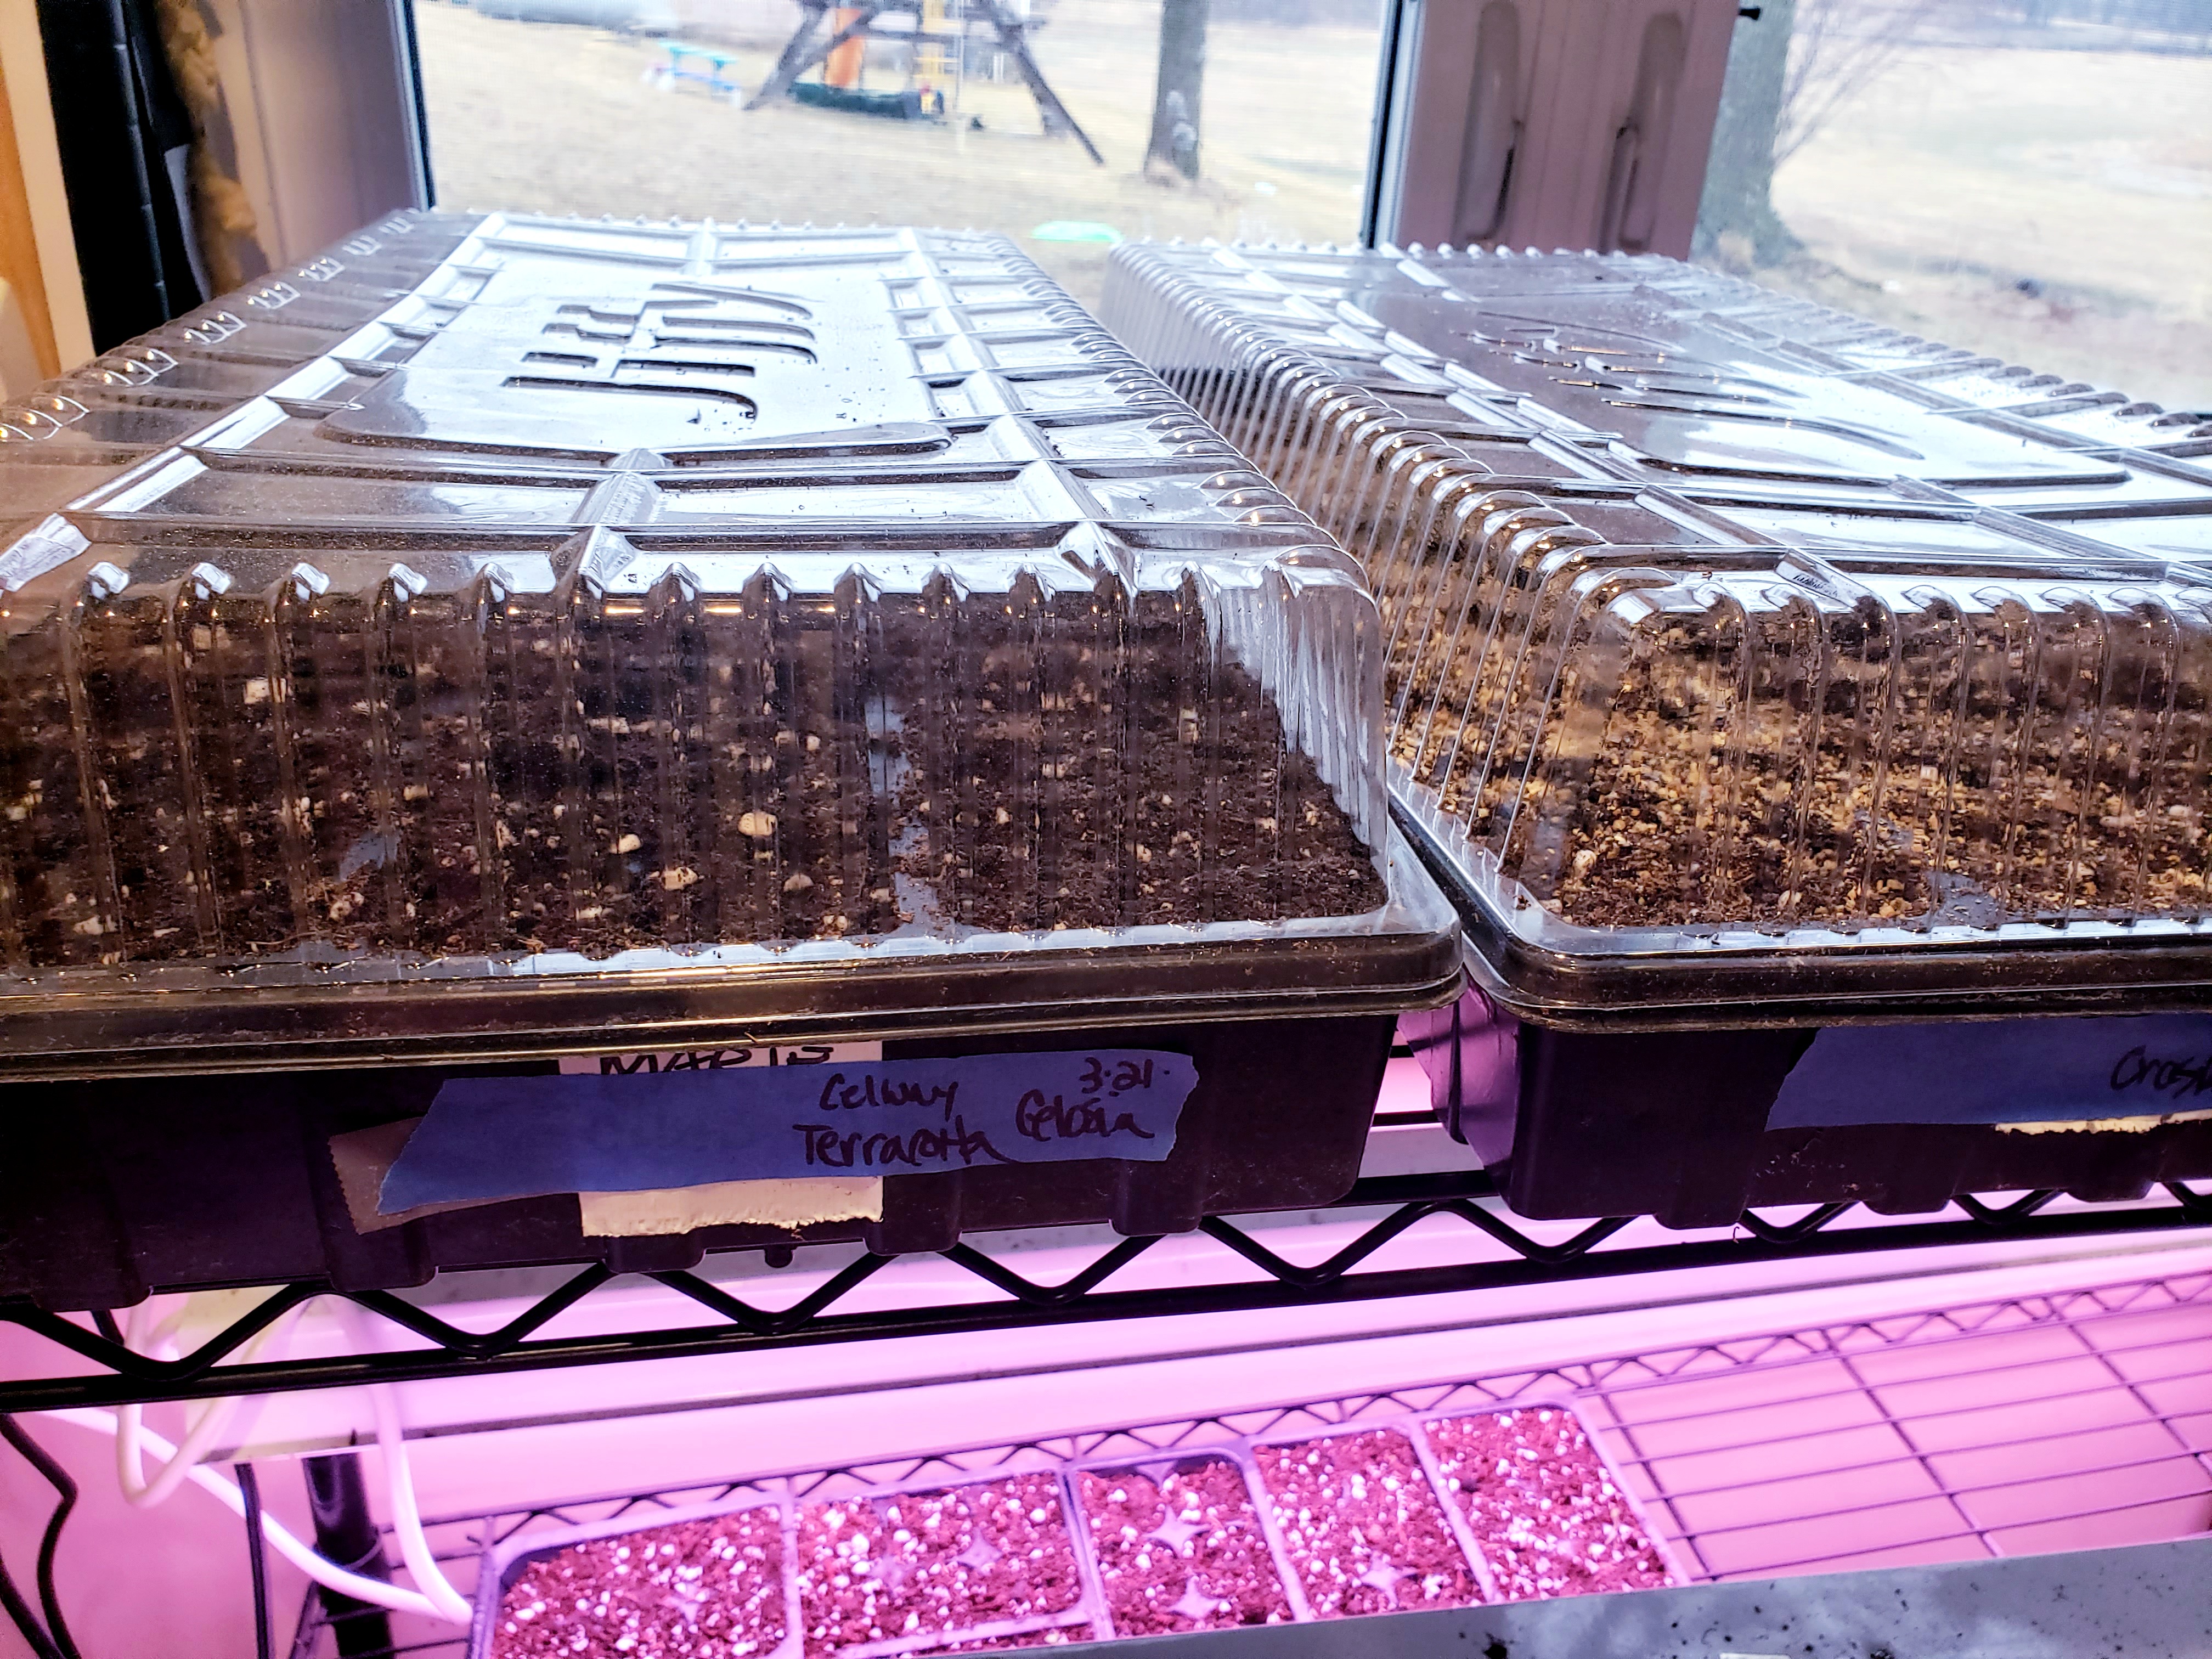 Seeds germinating in a seed tray